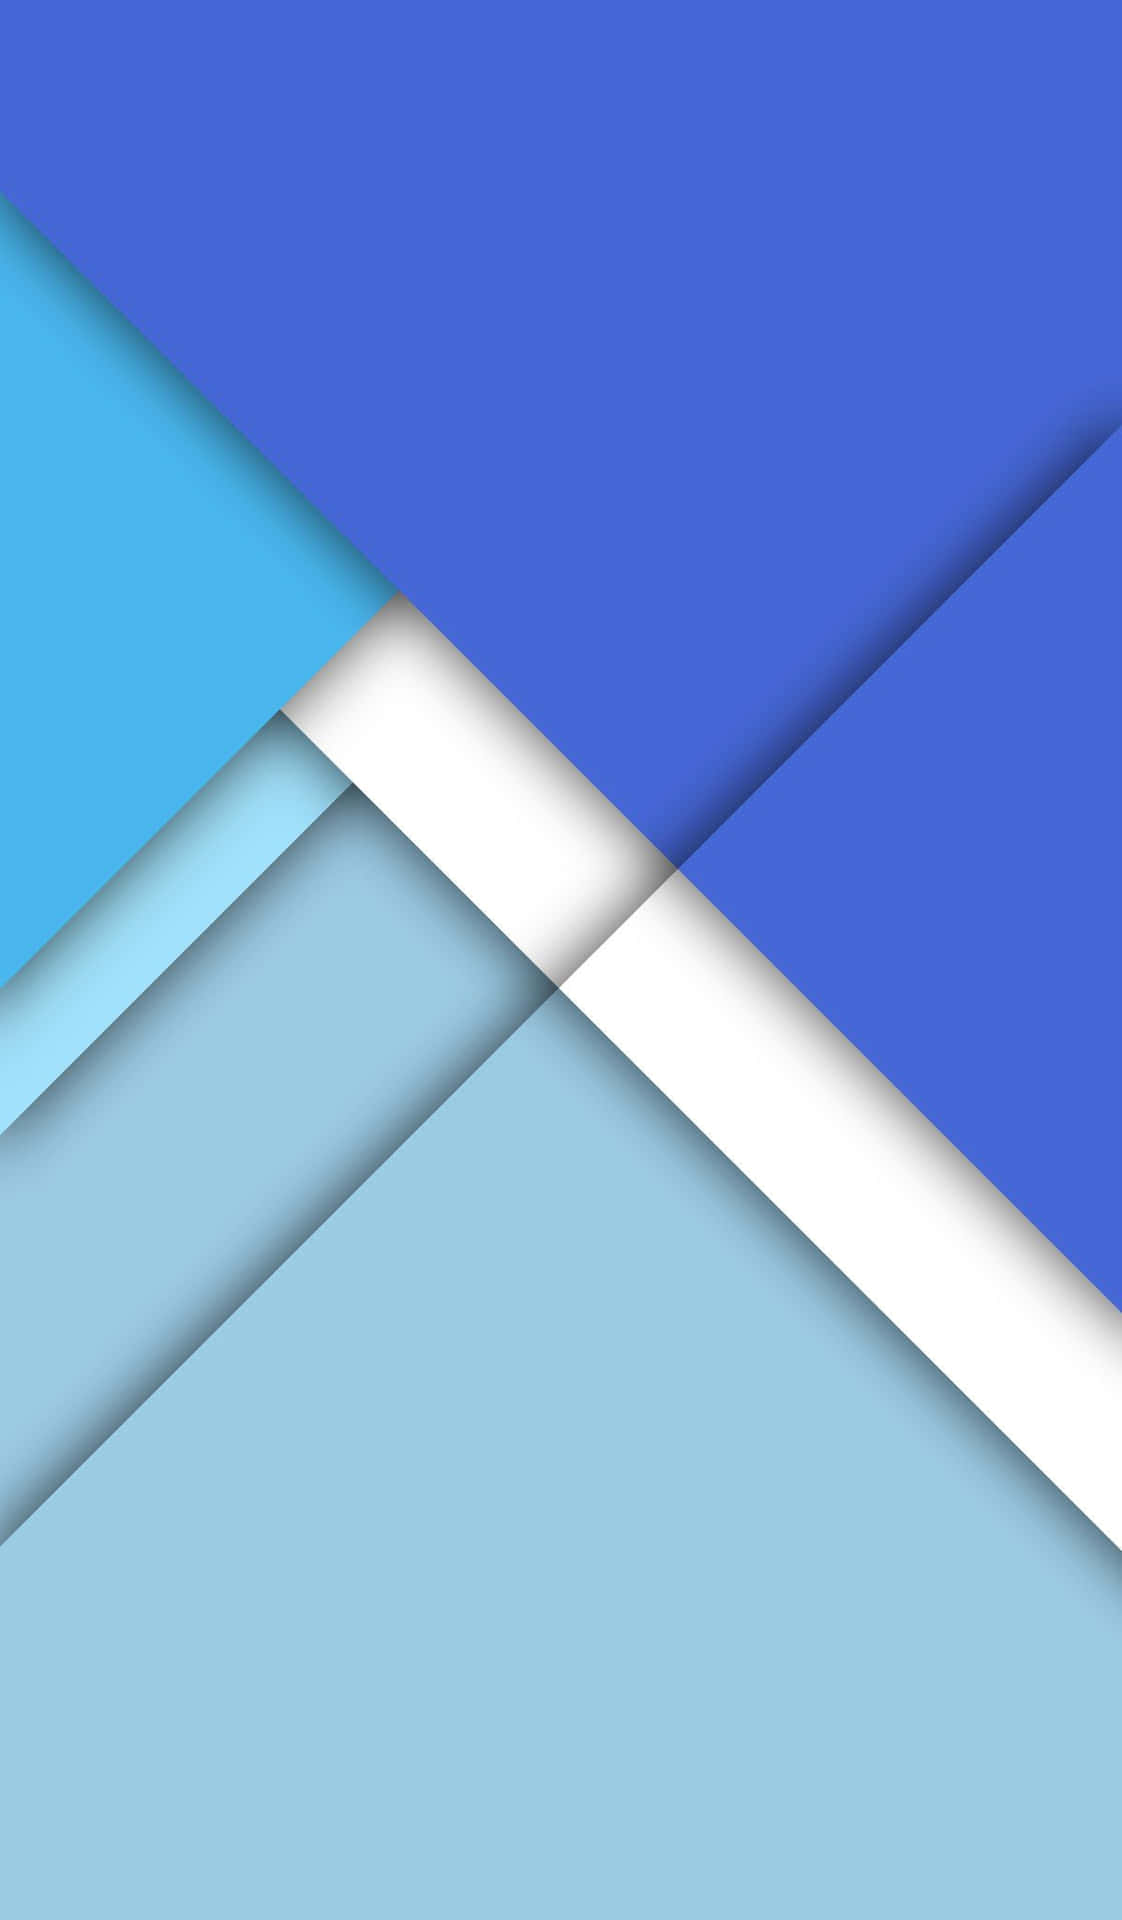 A Close-up Of Textured Material Using The Material Design Guidelines.